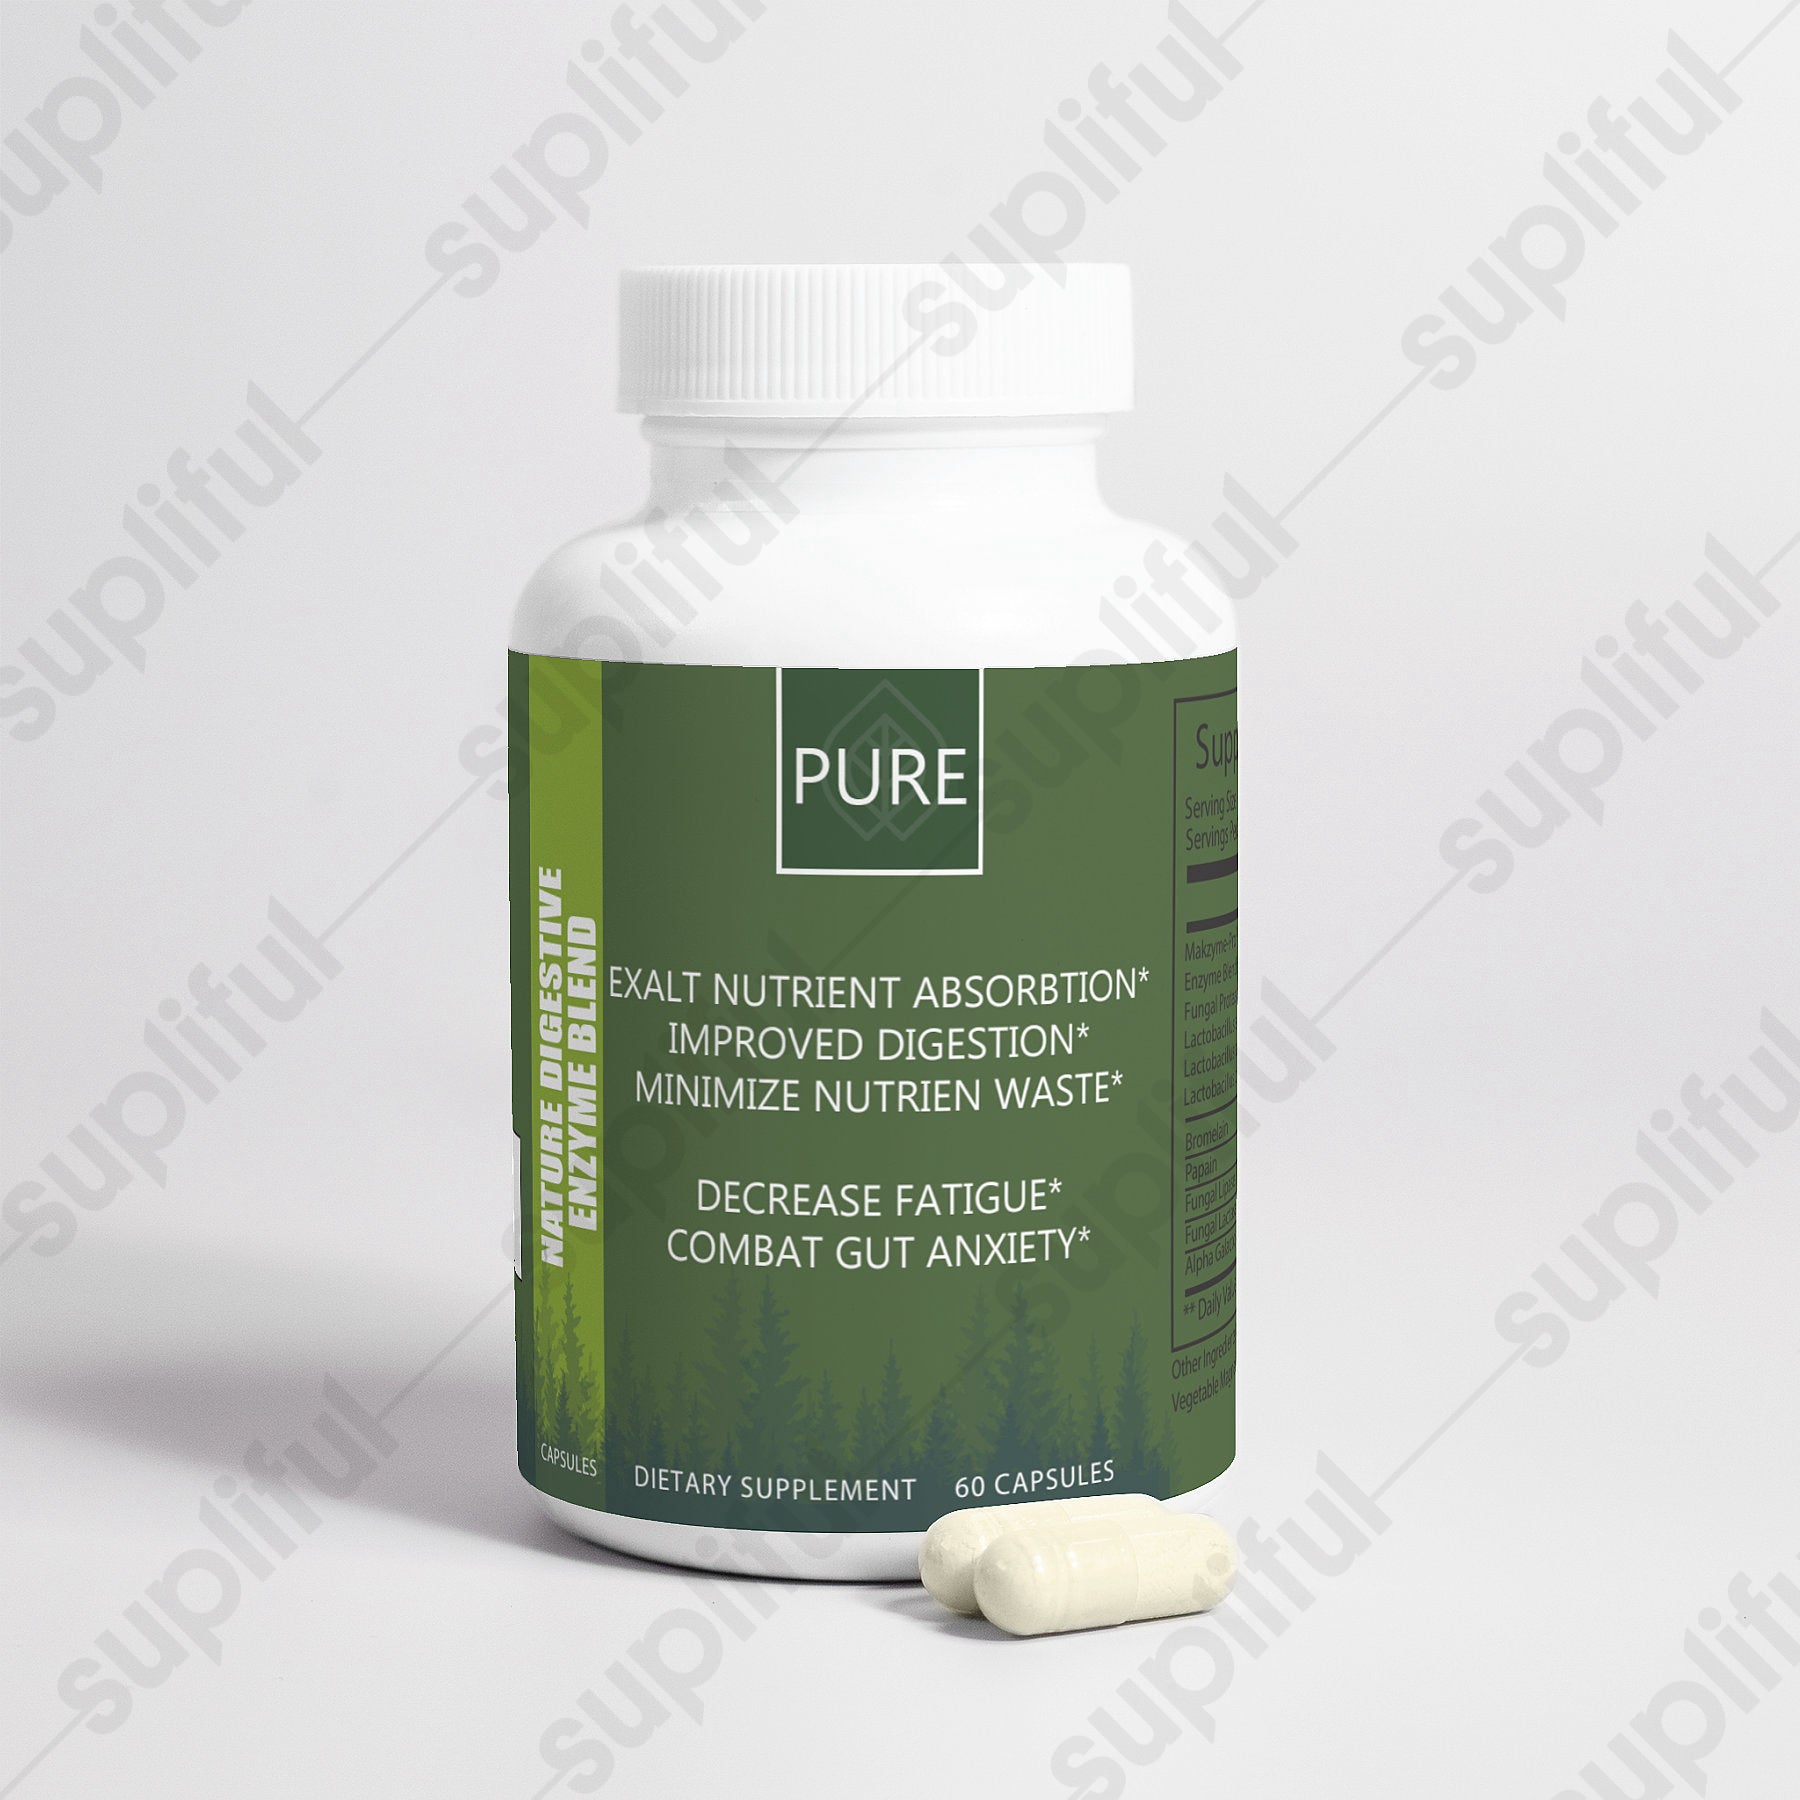 PURE. Digestive Enzyme Blend for Enhanced Nutrient Absorbtion PURE Supplement